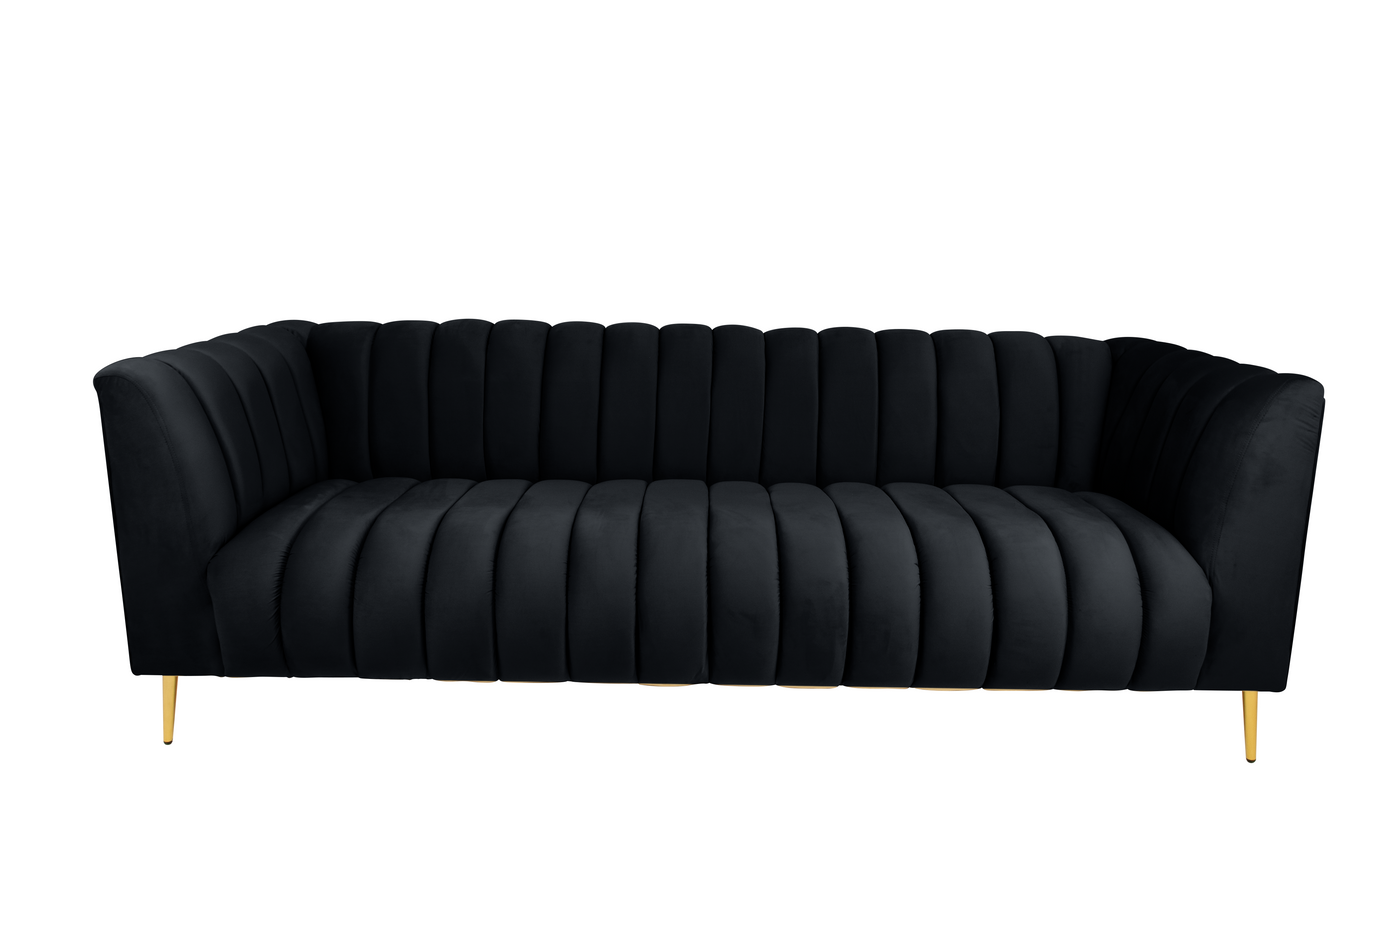 Zoey 3 Seater Stripe Couch